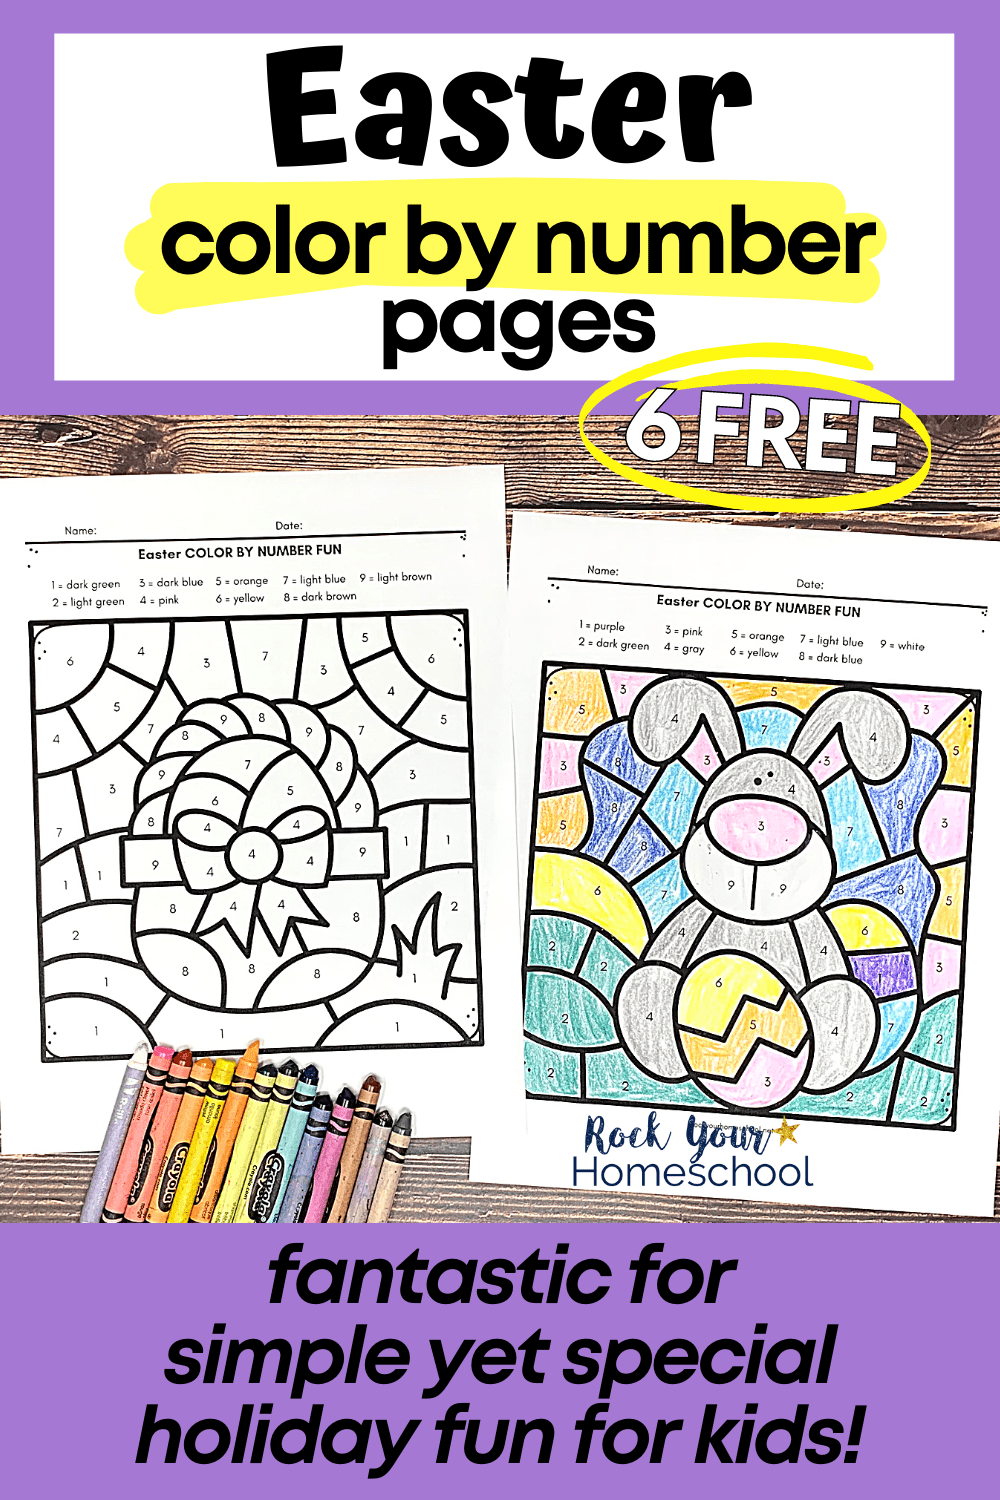 Easter Color by Number Pages for Excellent Holiday Fun (6 Free)